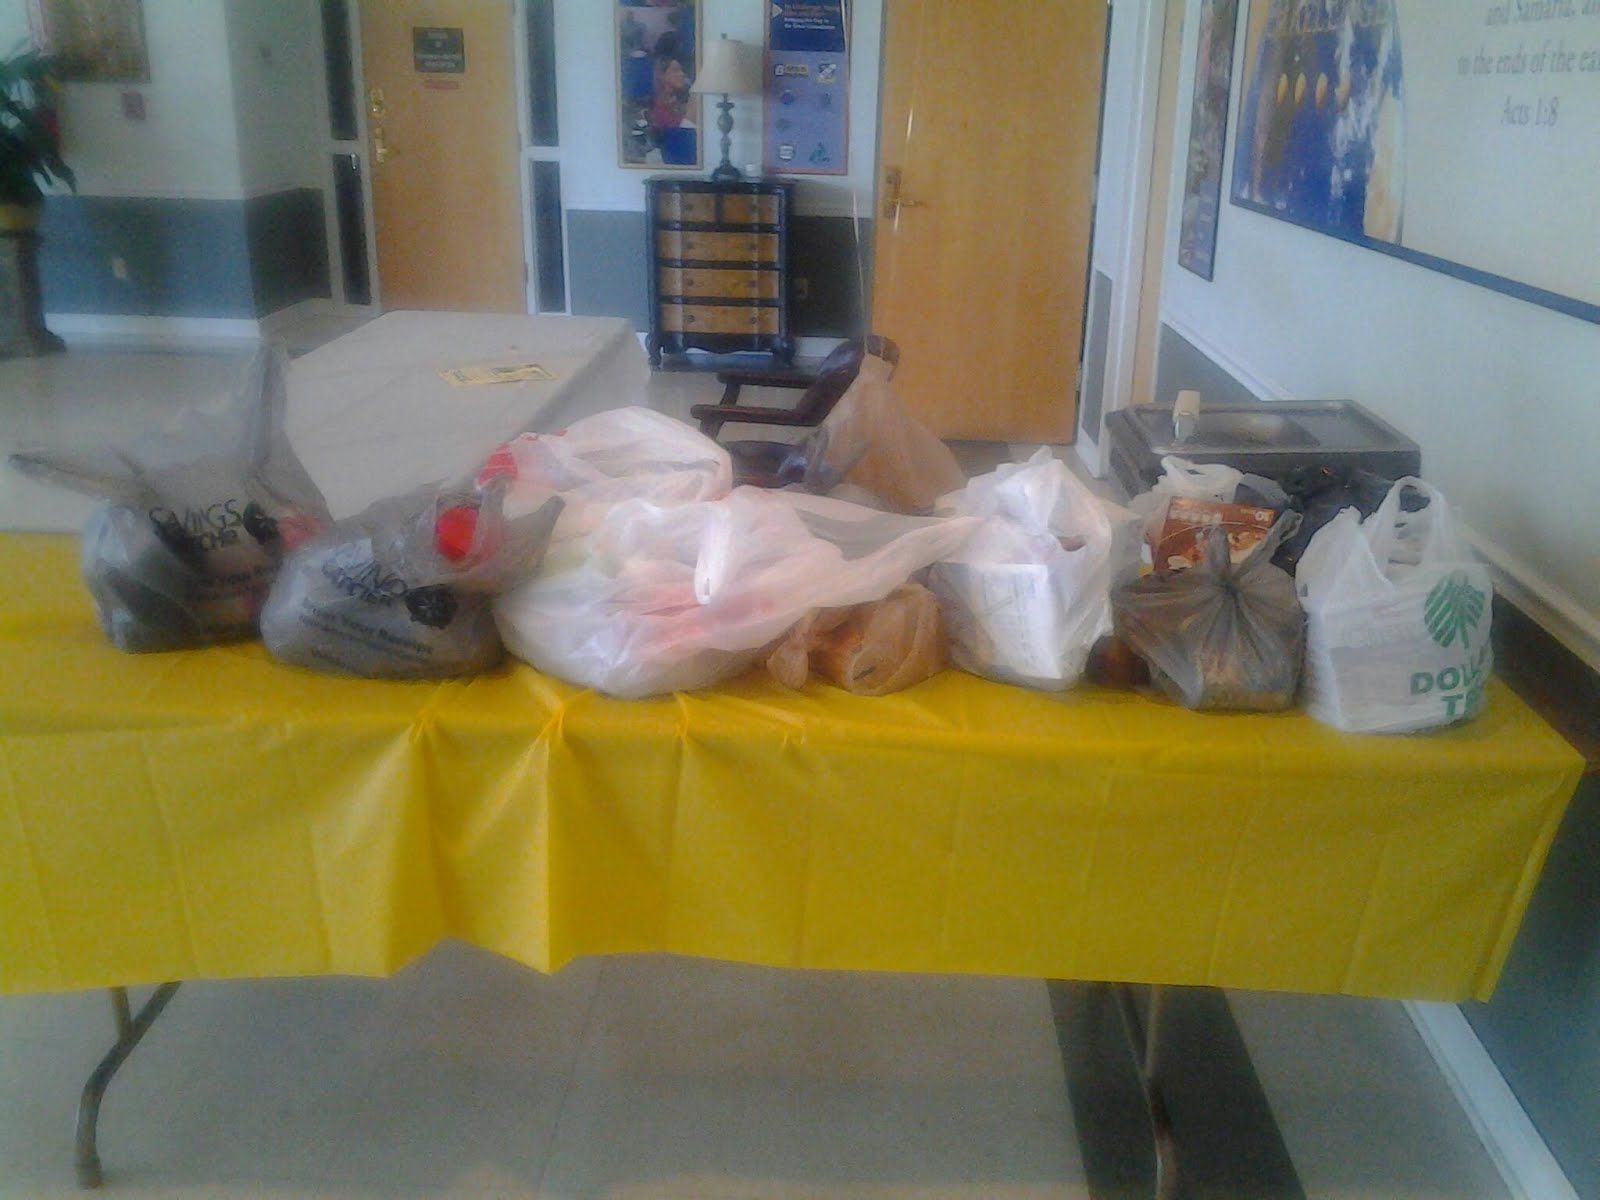 Donations from CAOT supporters to a Savannah-based nonprofit in 2014